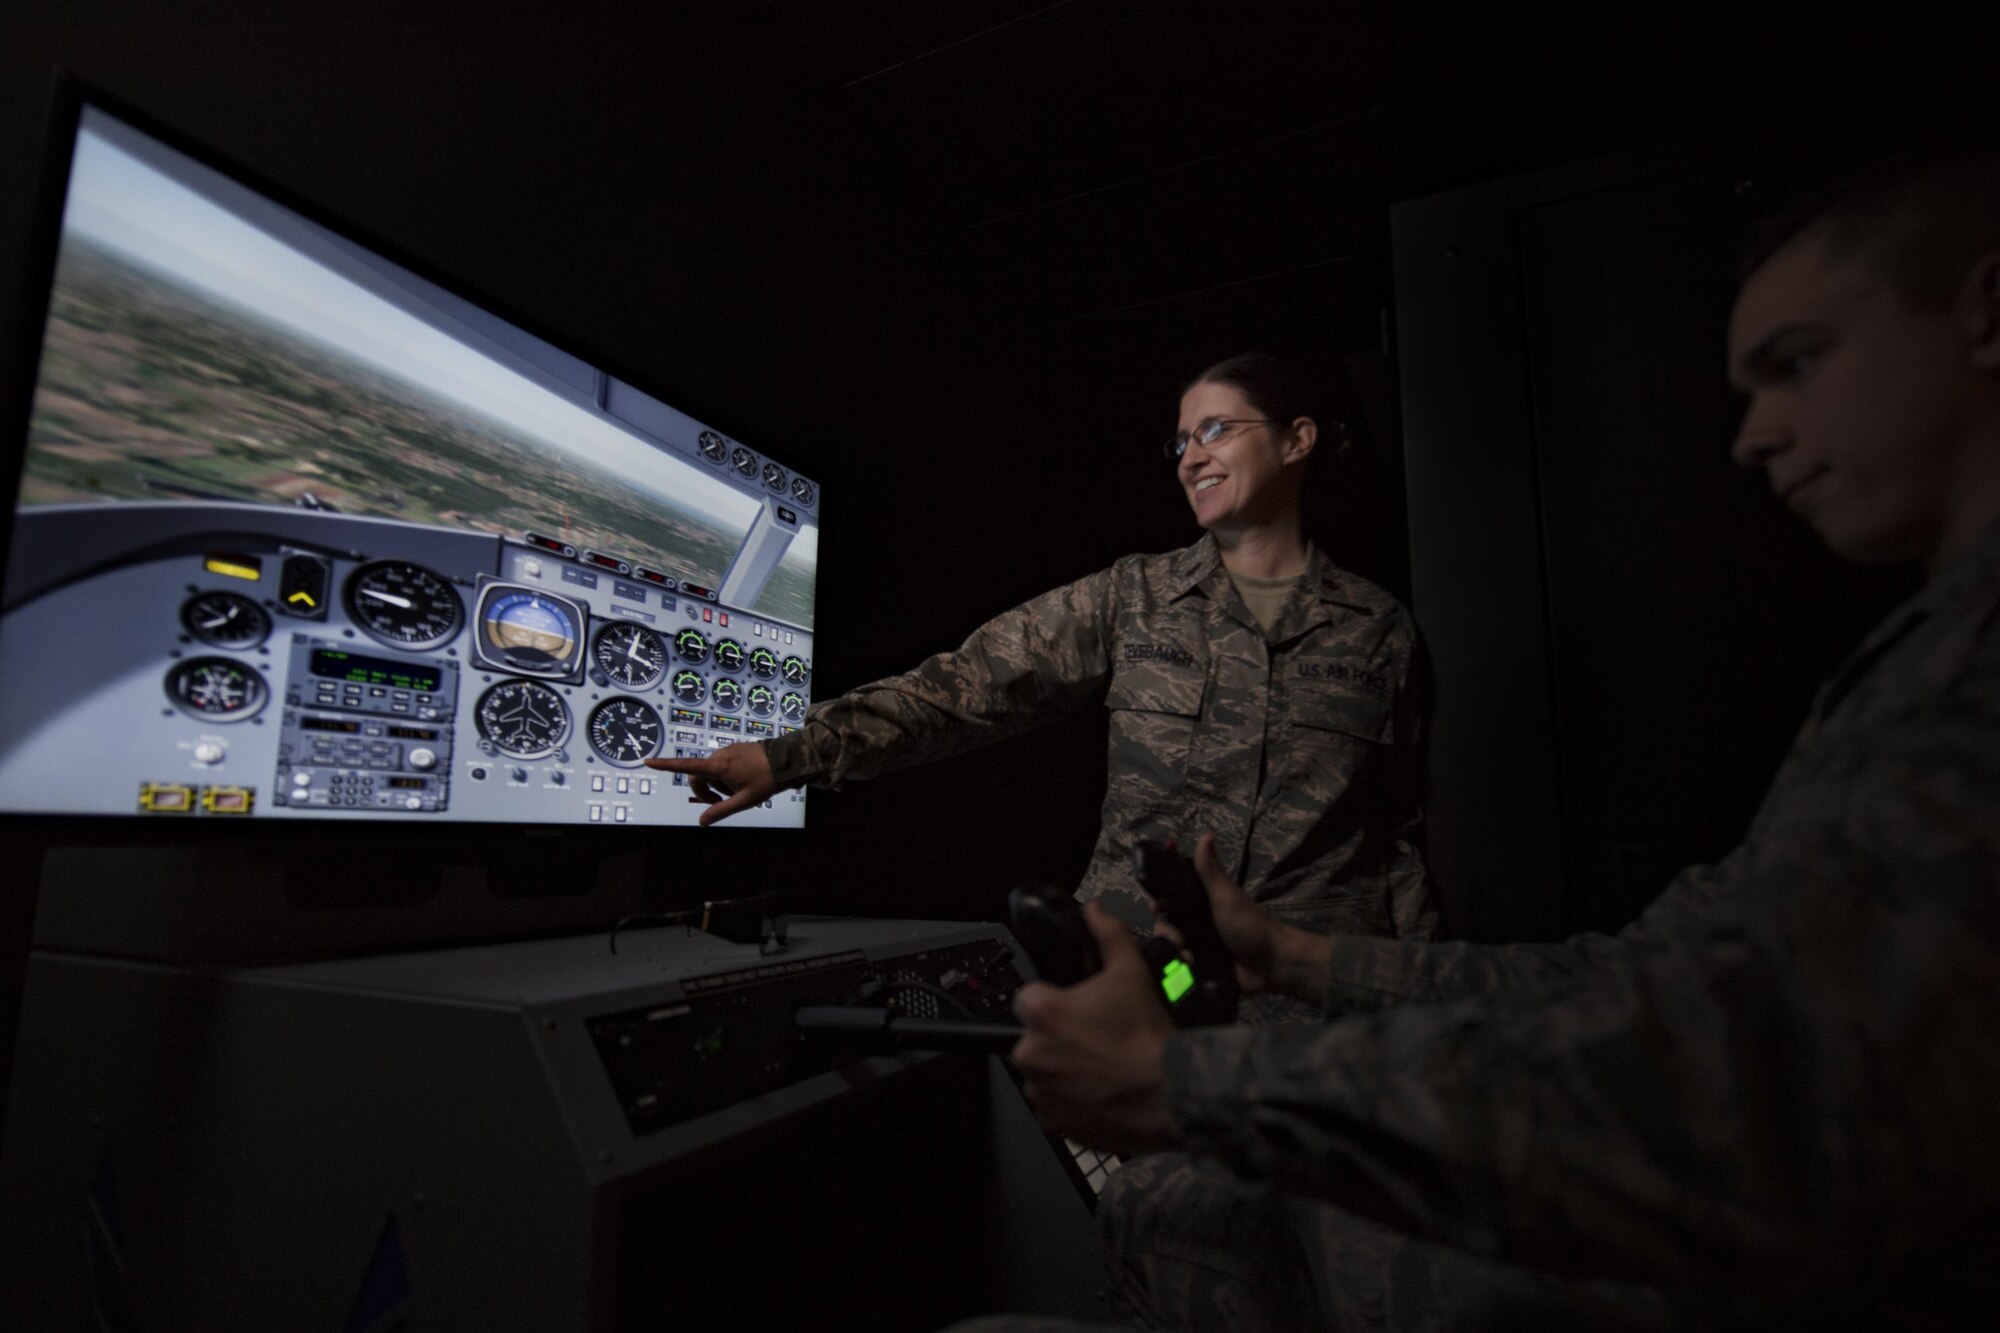 Maj. Heather Tevebaugh, 23d Aerospace Medicine Squadron aerospace physiologist assists Airman 1st Class Chase Young, 23d AMDS bioenvironmental technician, with a flight simulator, Jan. 18, 2016, at Moody Air Force Base, Ga. Aerospace physiologists manage specialized physiology support programs and procedures that ensure flight crews are prepared for high altitudes. In the Air Force, there are currently 118 active duty and three Air Force reservist aerospace physiologists. (U.S. Air Force photo by Airman 1st Class Daniel Snider)